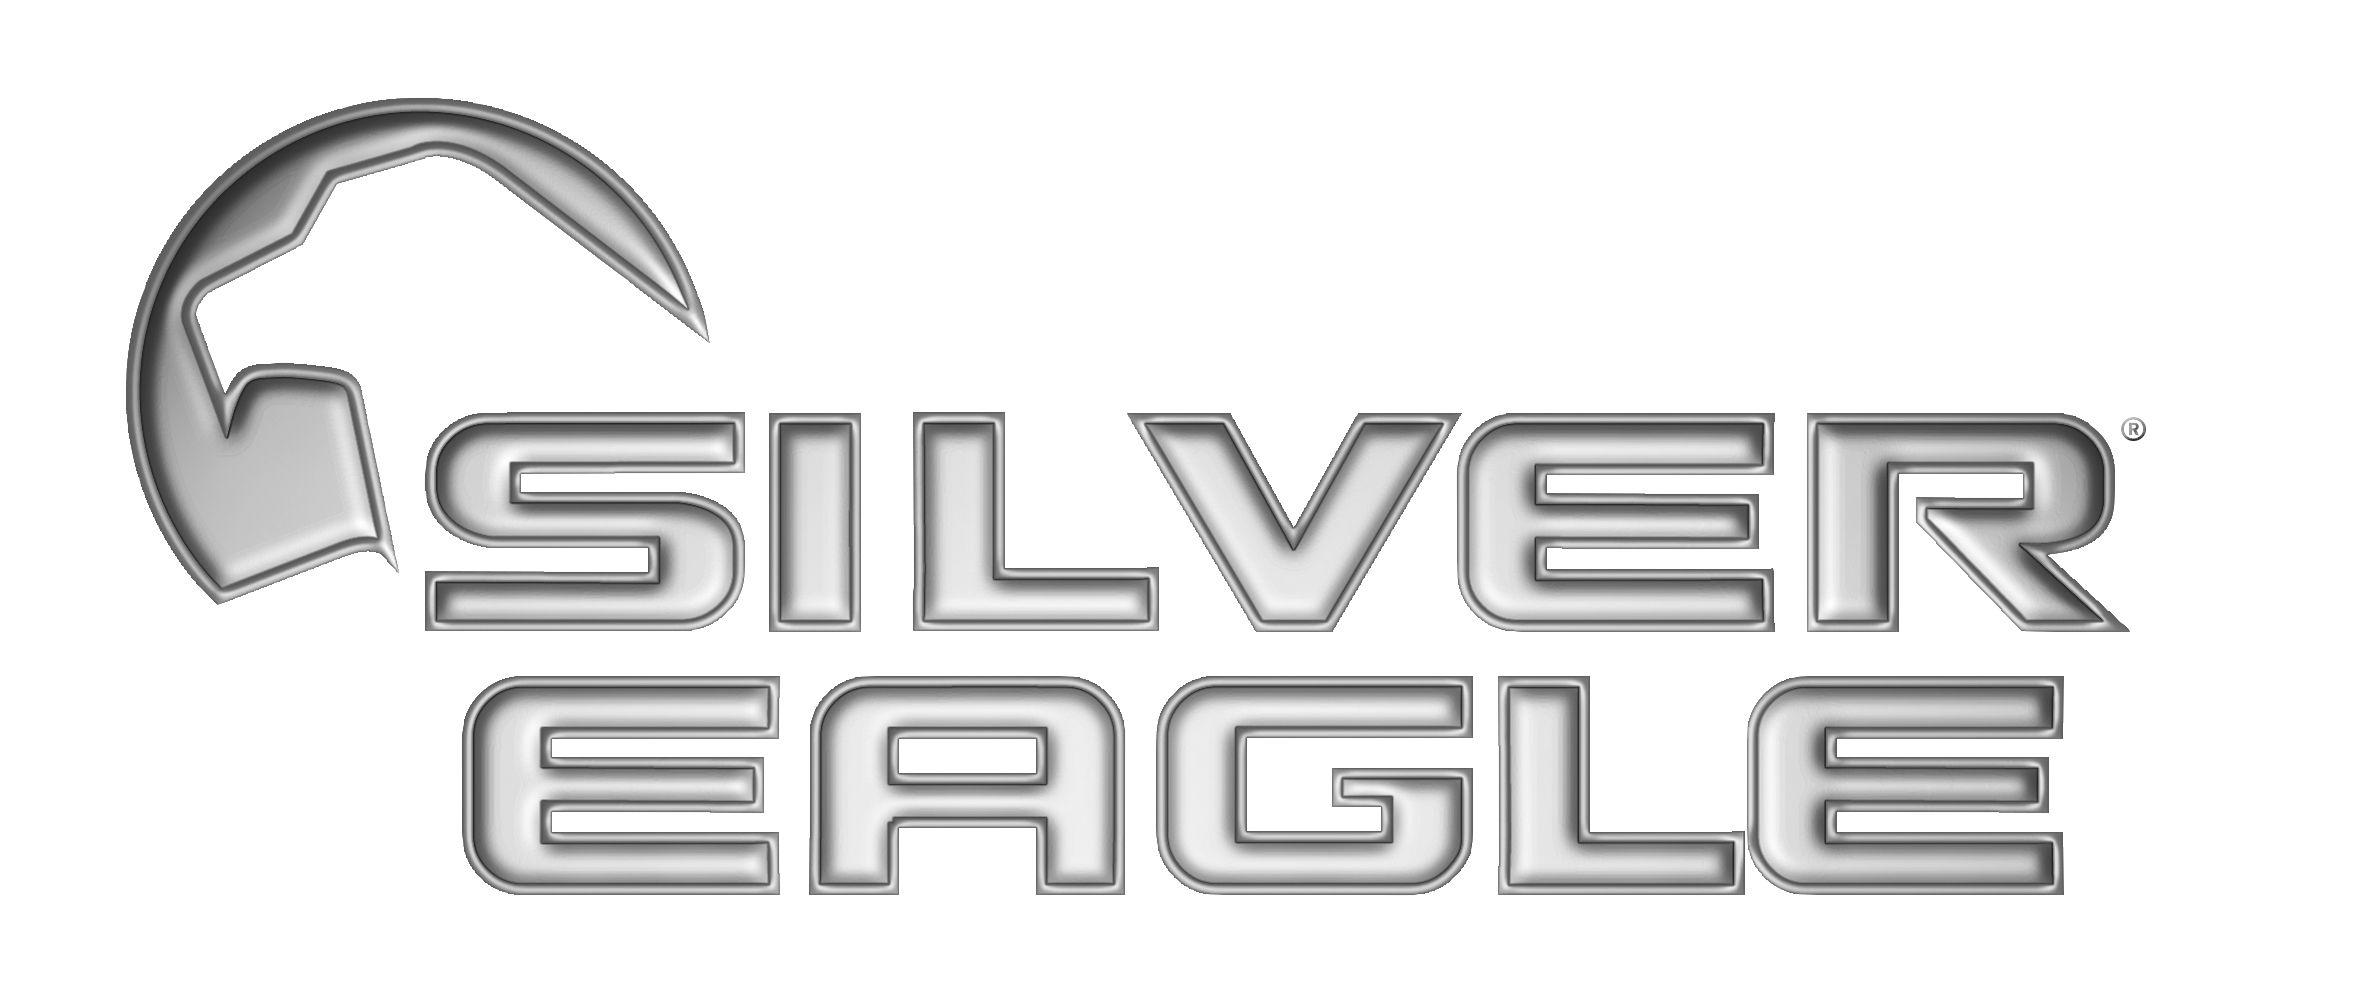 Silver Eagle Logo - Hand Tools & Automotive Tools. Franchise Business Opportunities